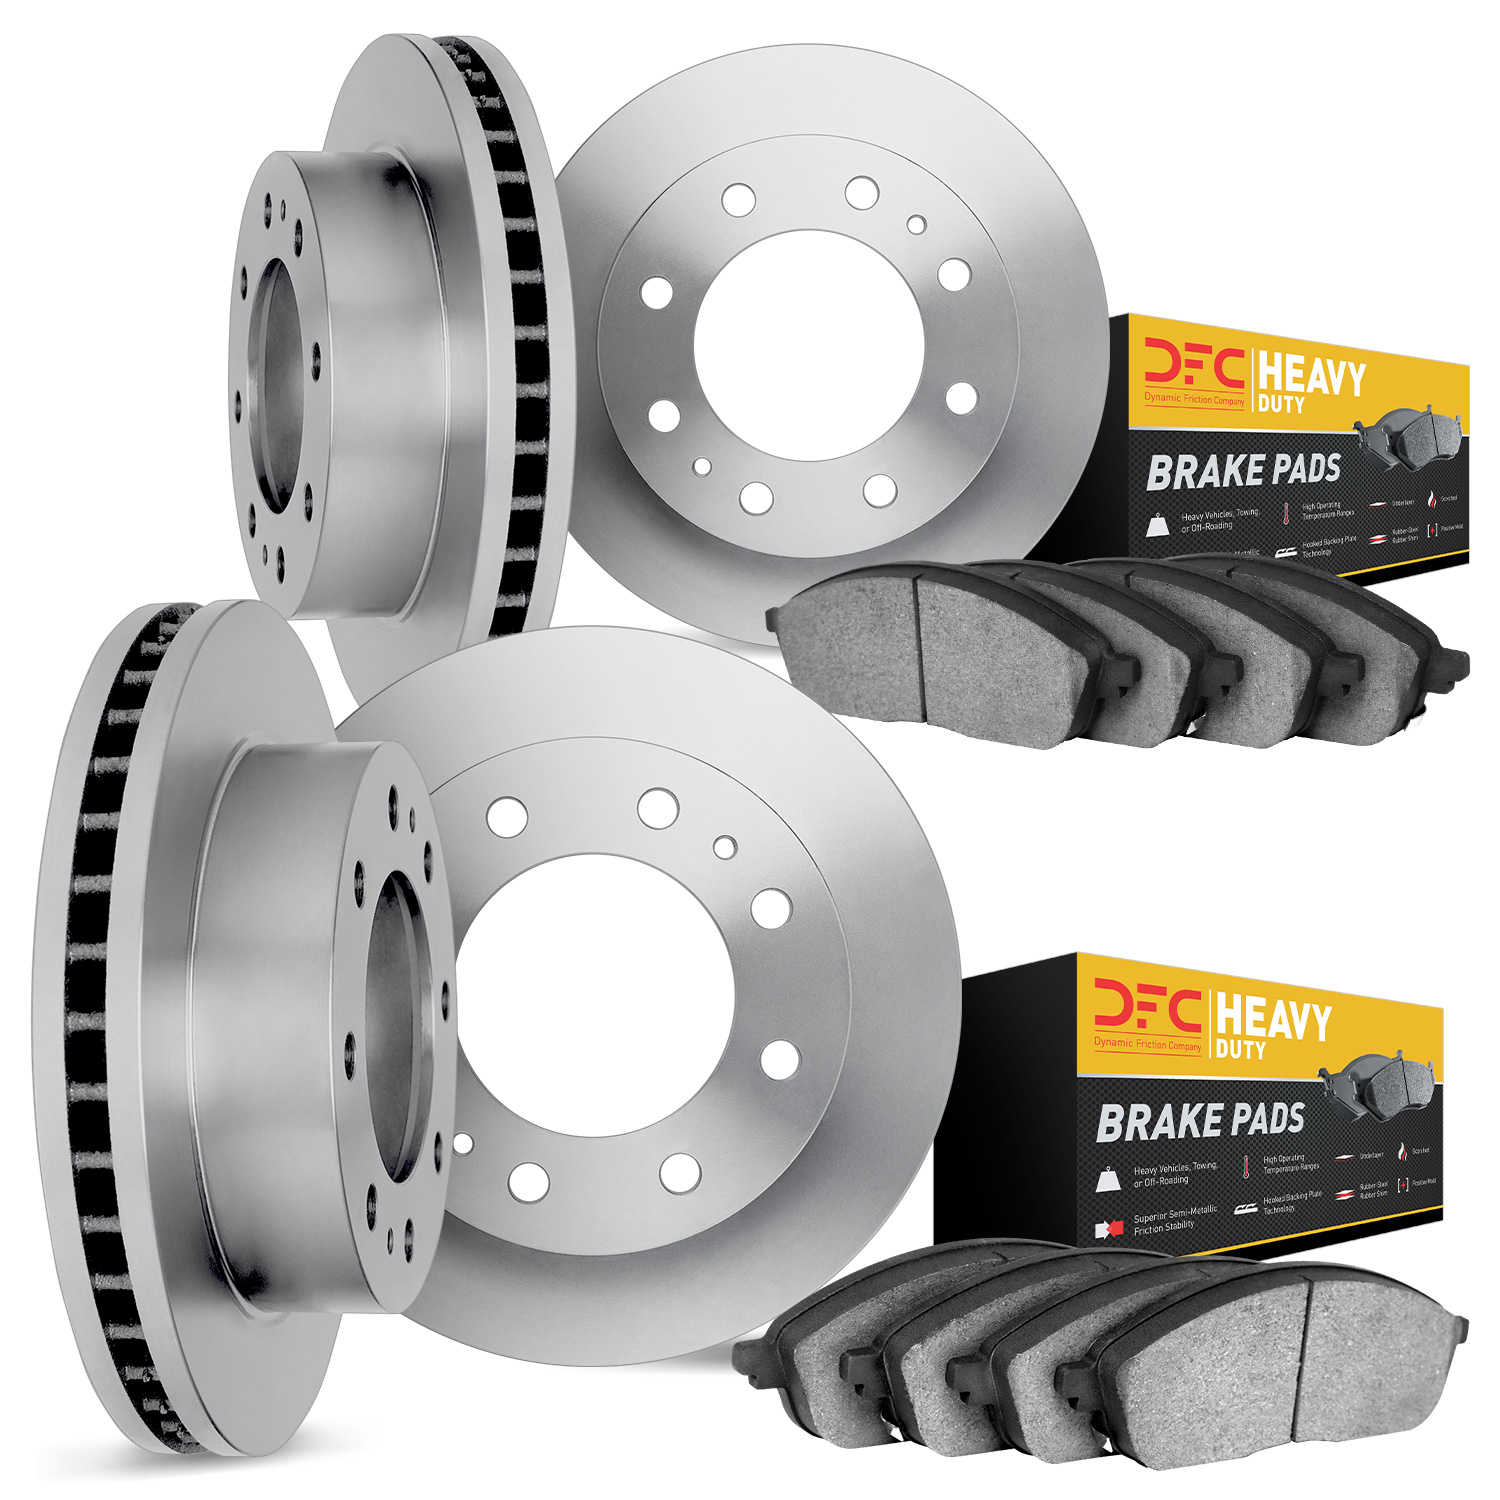 6204-99332 Brake Rotors w/Heavy-Duty Brake Pads Kit, Fits Select Ford/Lincoln/Mercury/Mazda, Position: Front and Rear